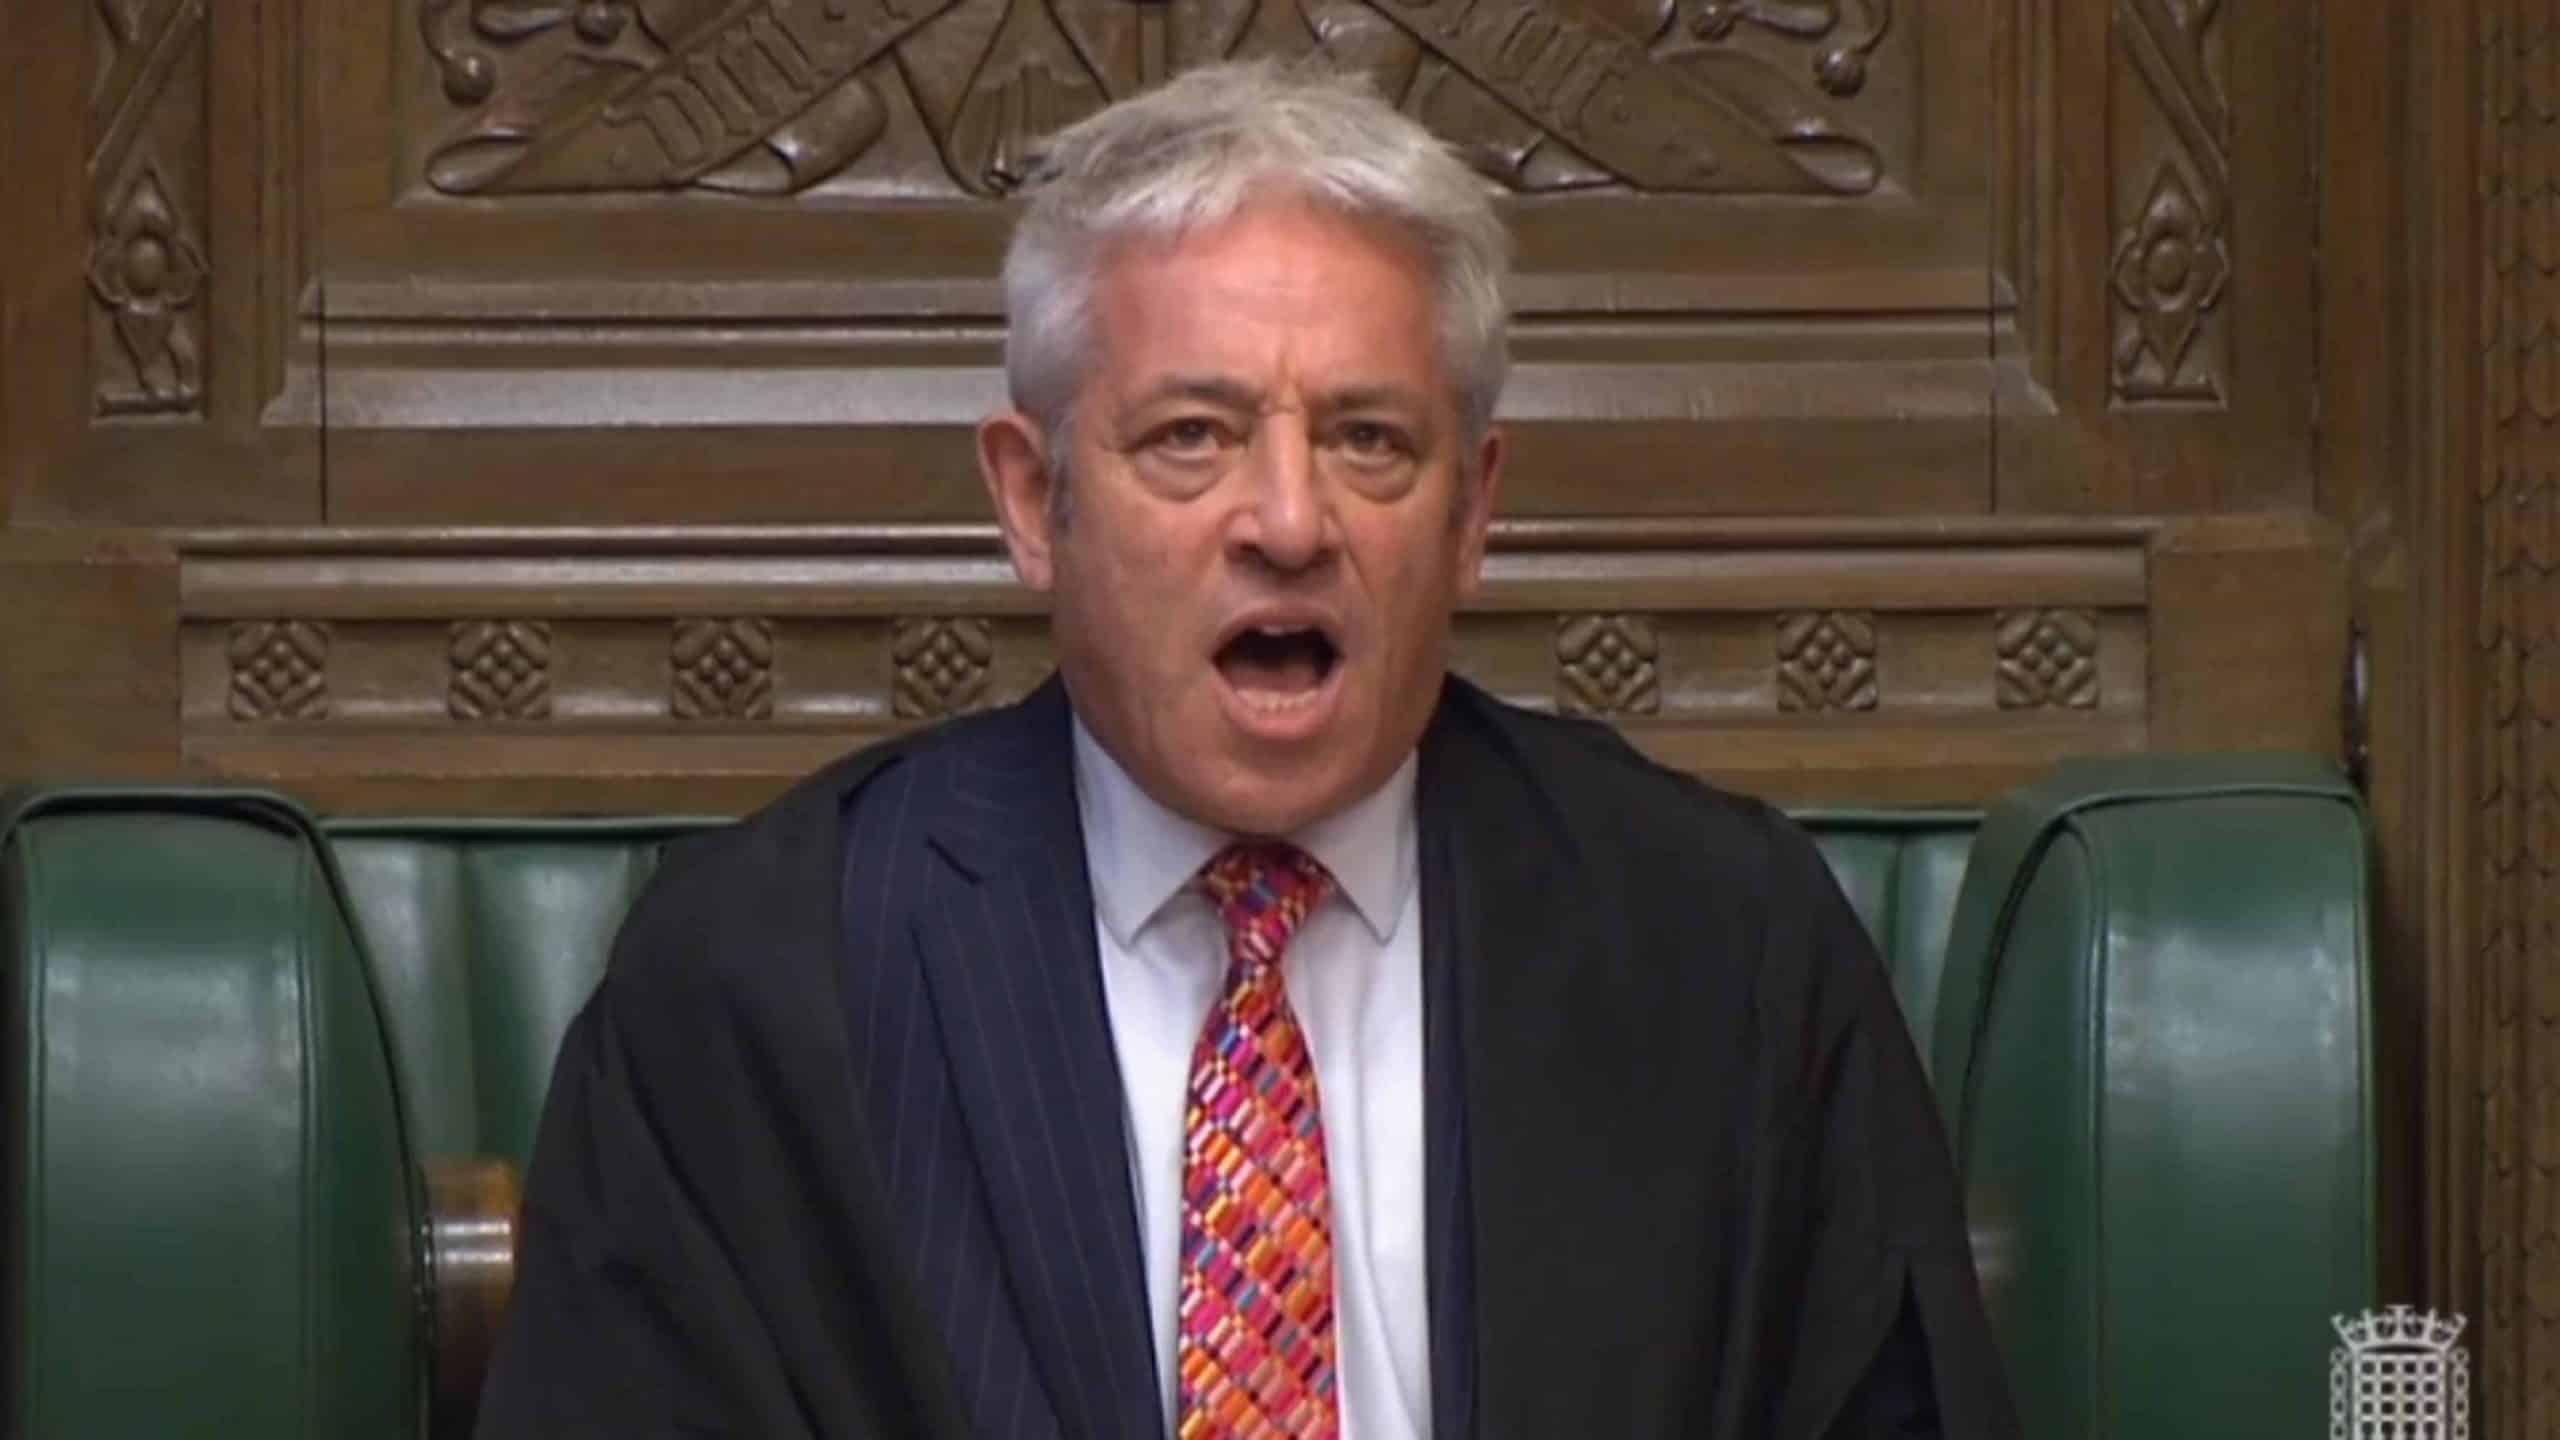 Bercow refuses to allow ‘meaningful vote’ on Brexit deal today